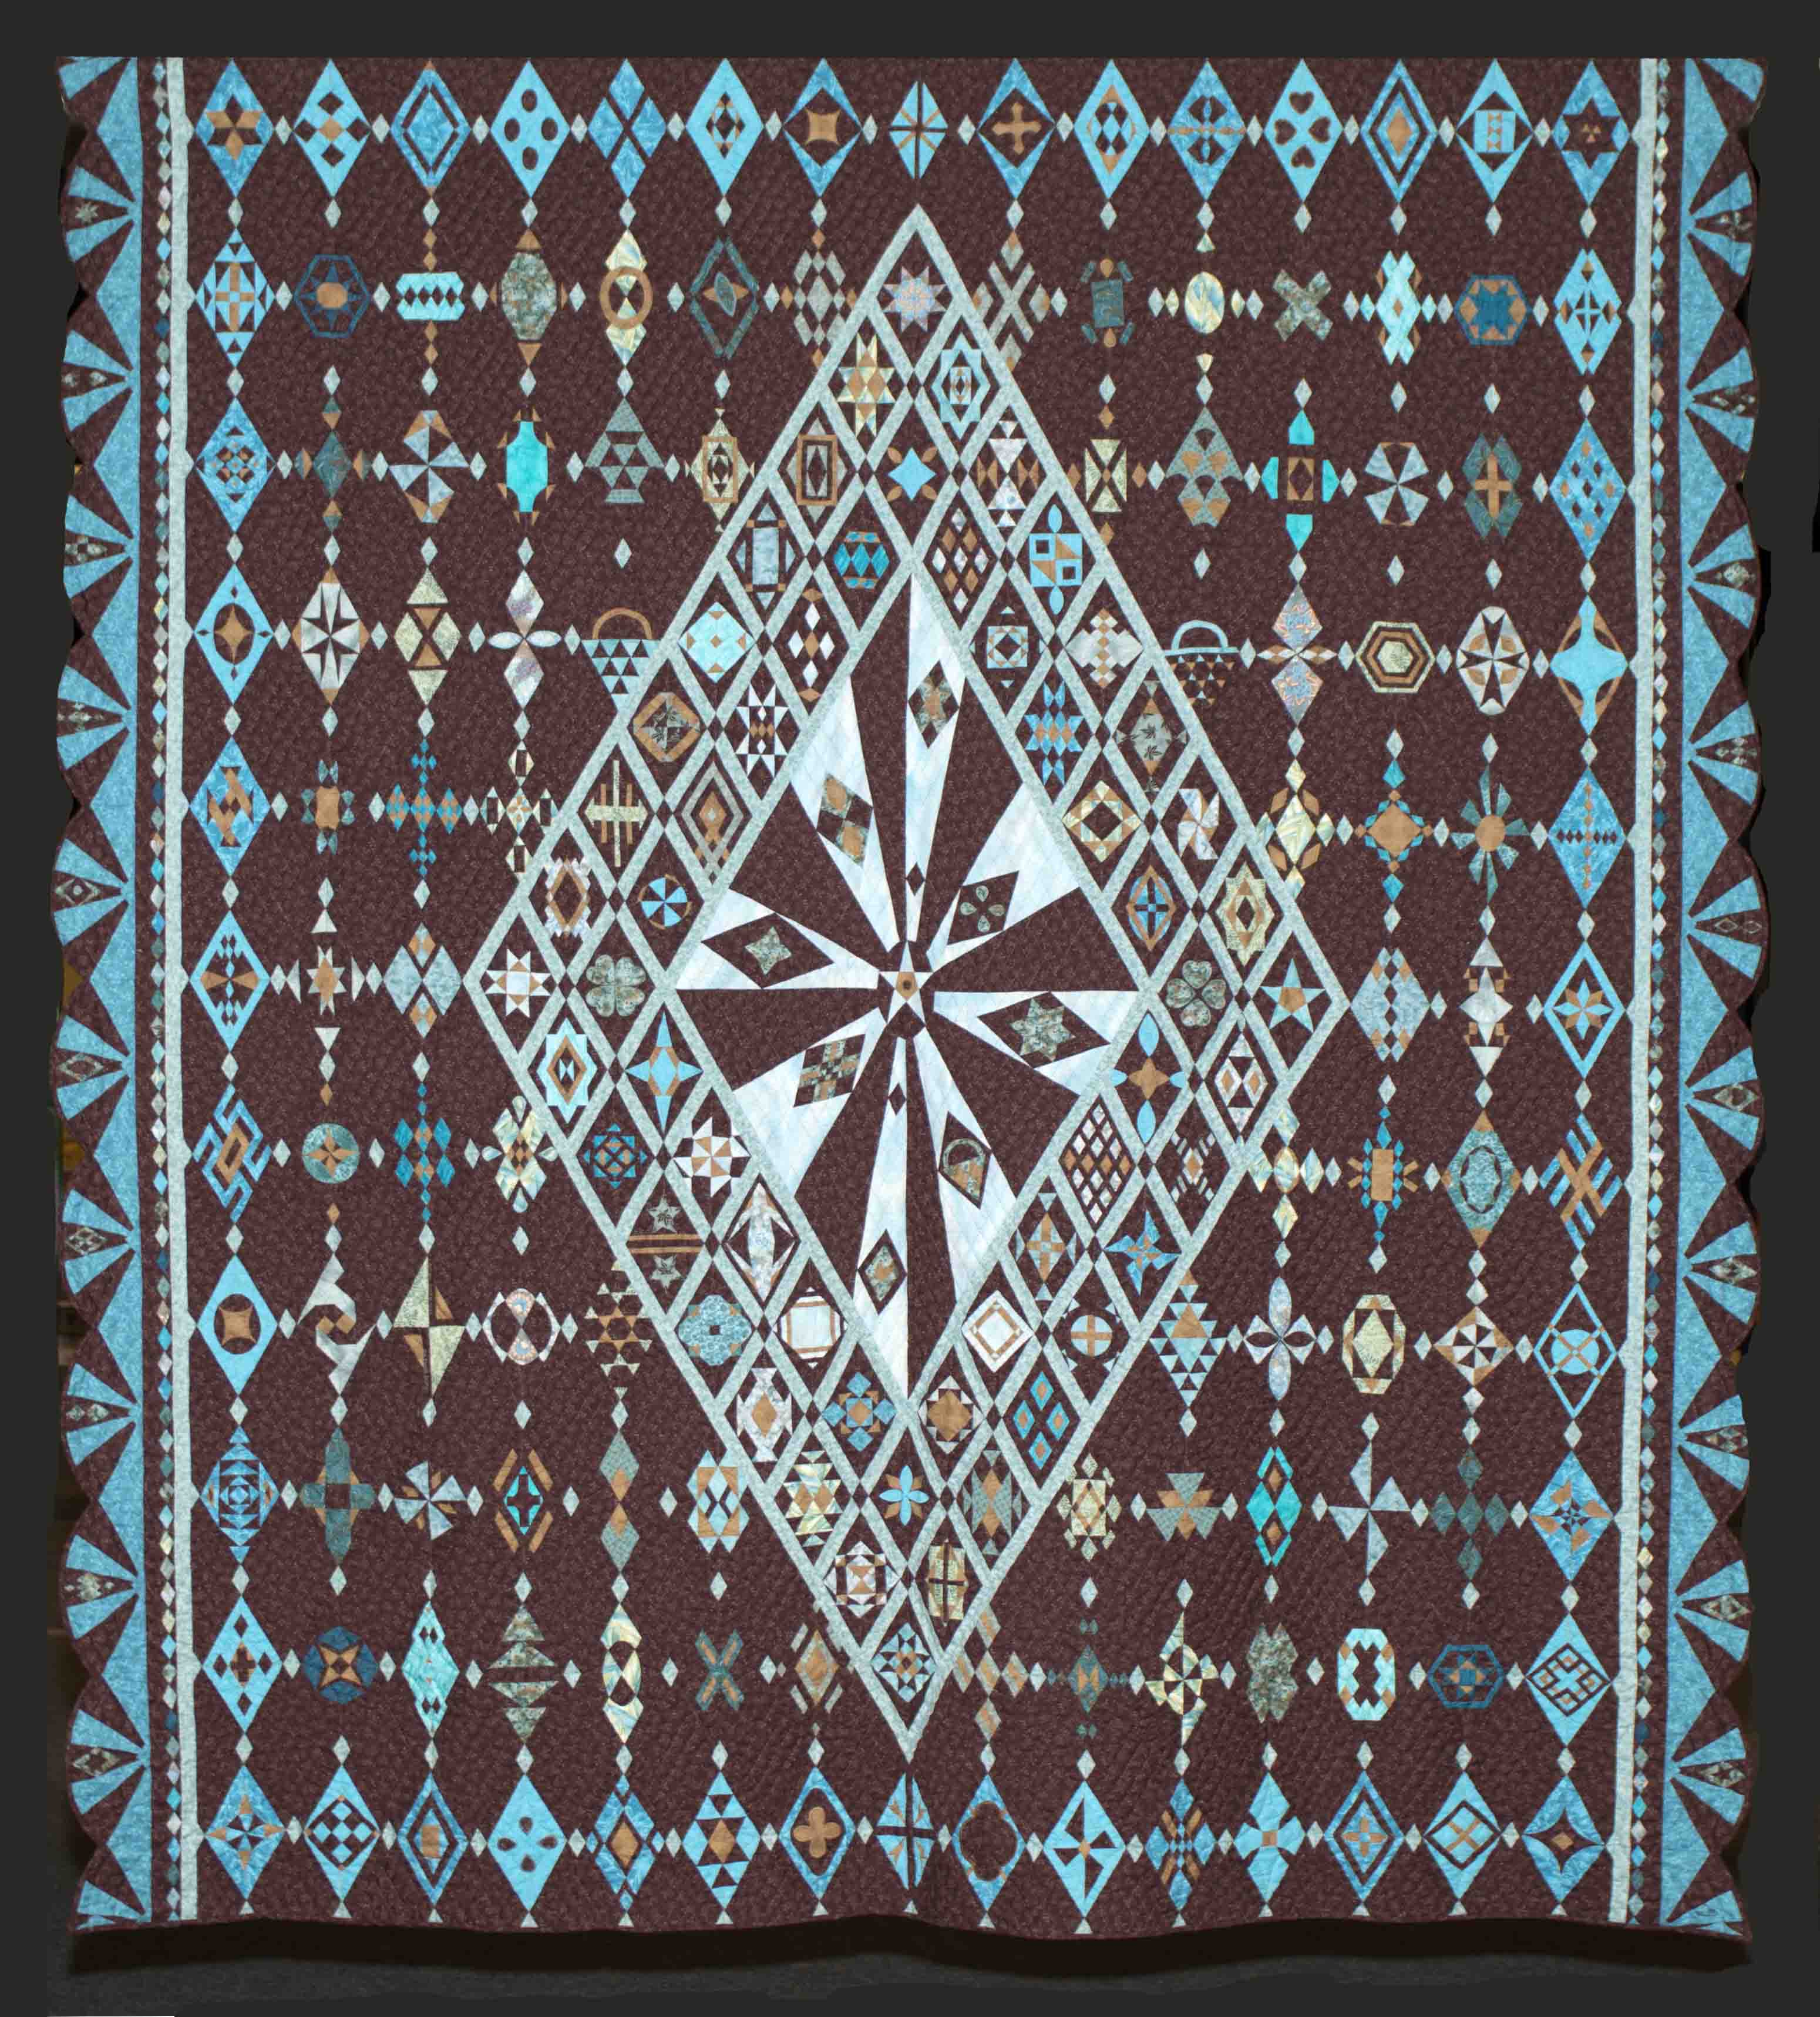 Award-of-Quiltmania-Michat